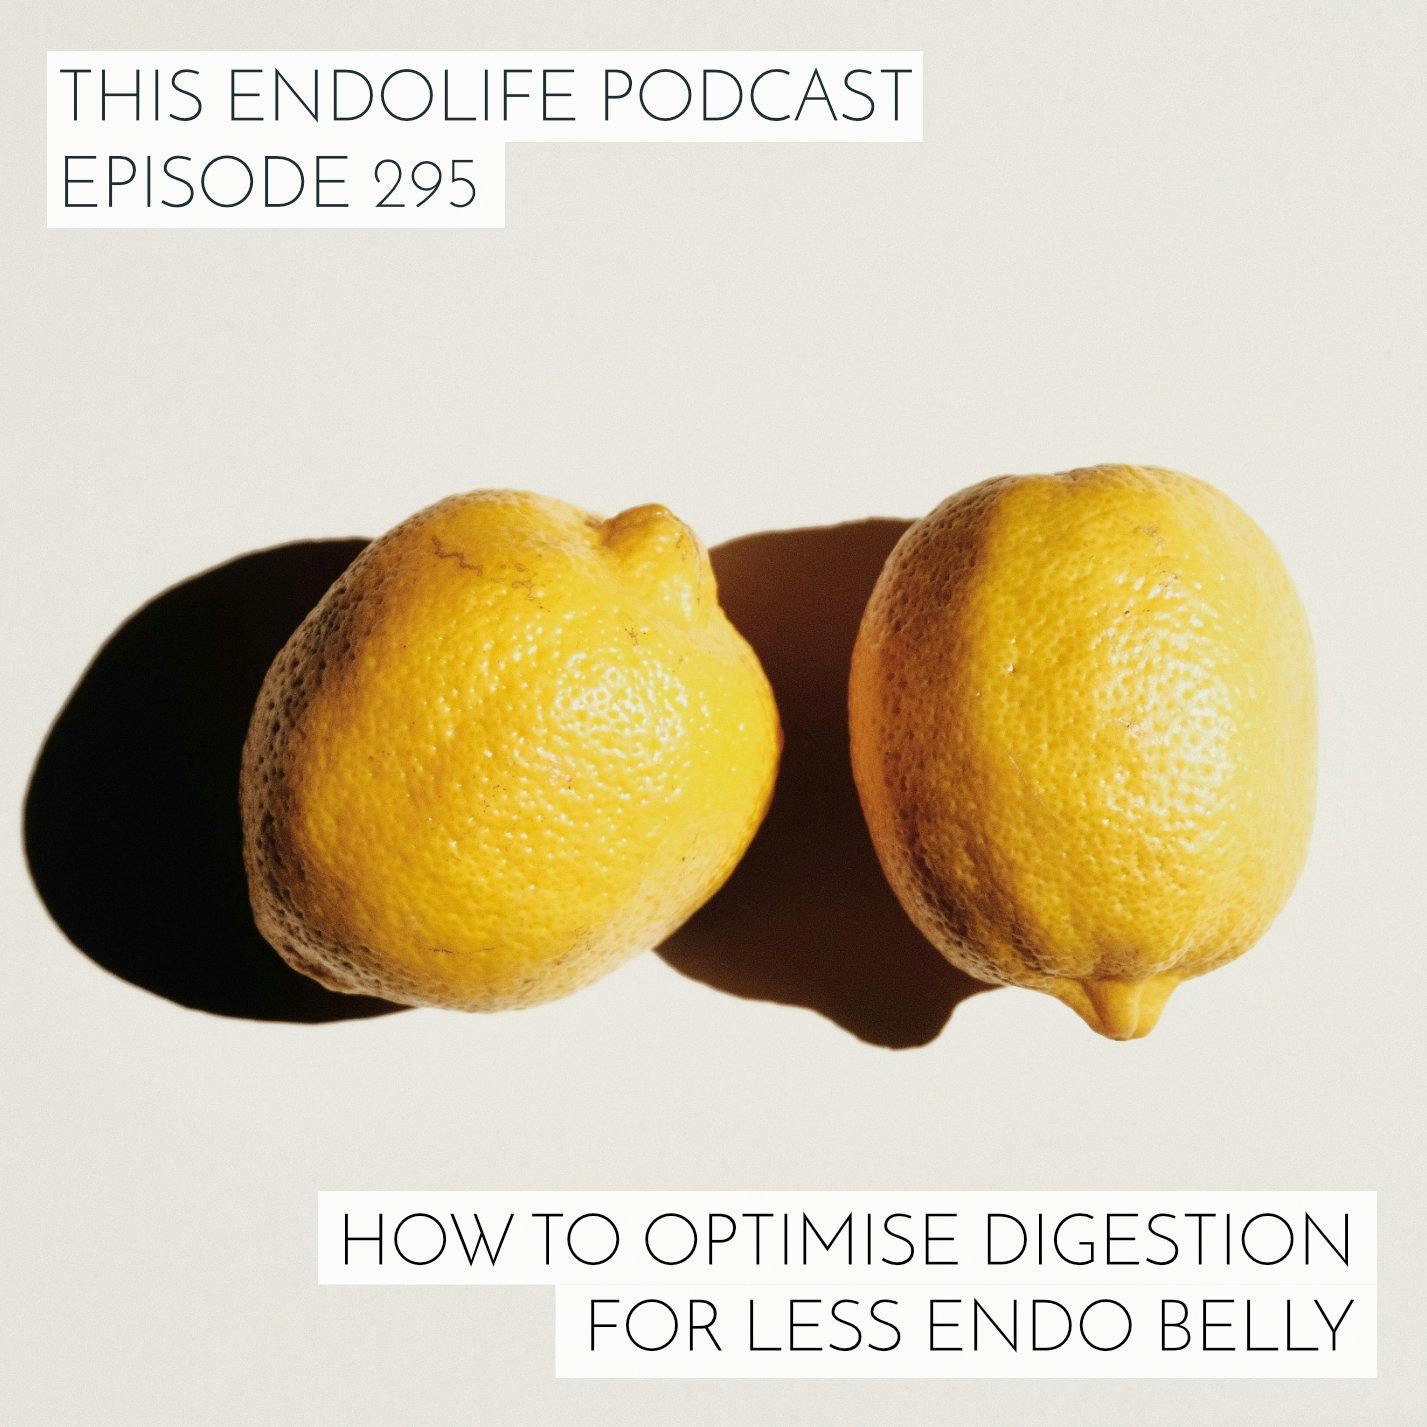 How to Optimise Digestion for Less Endo Belly